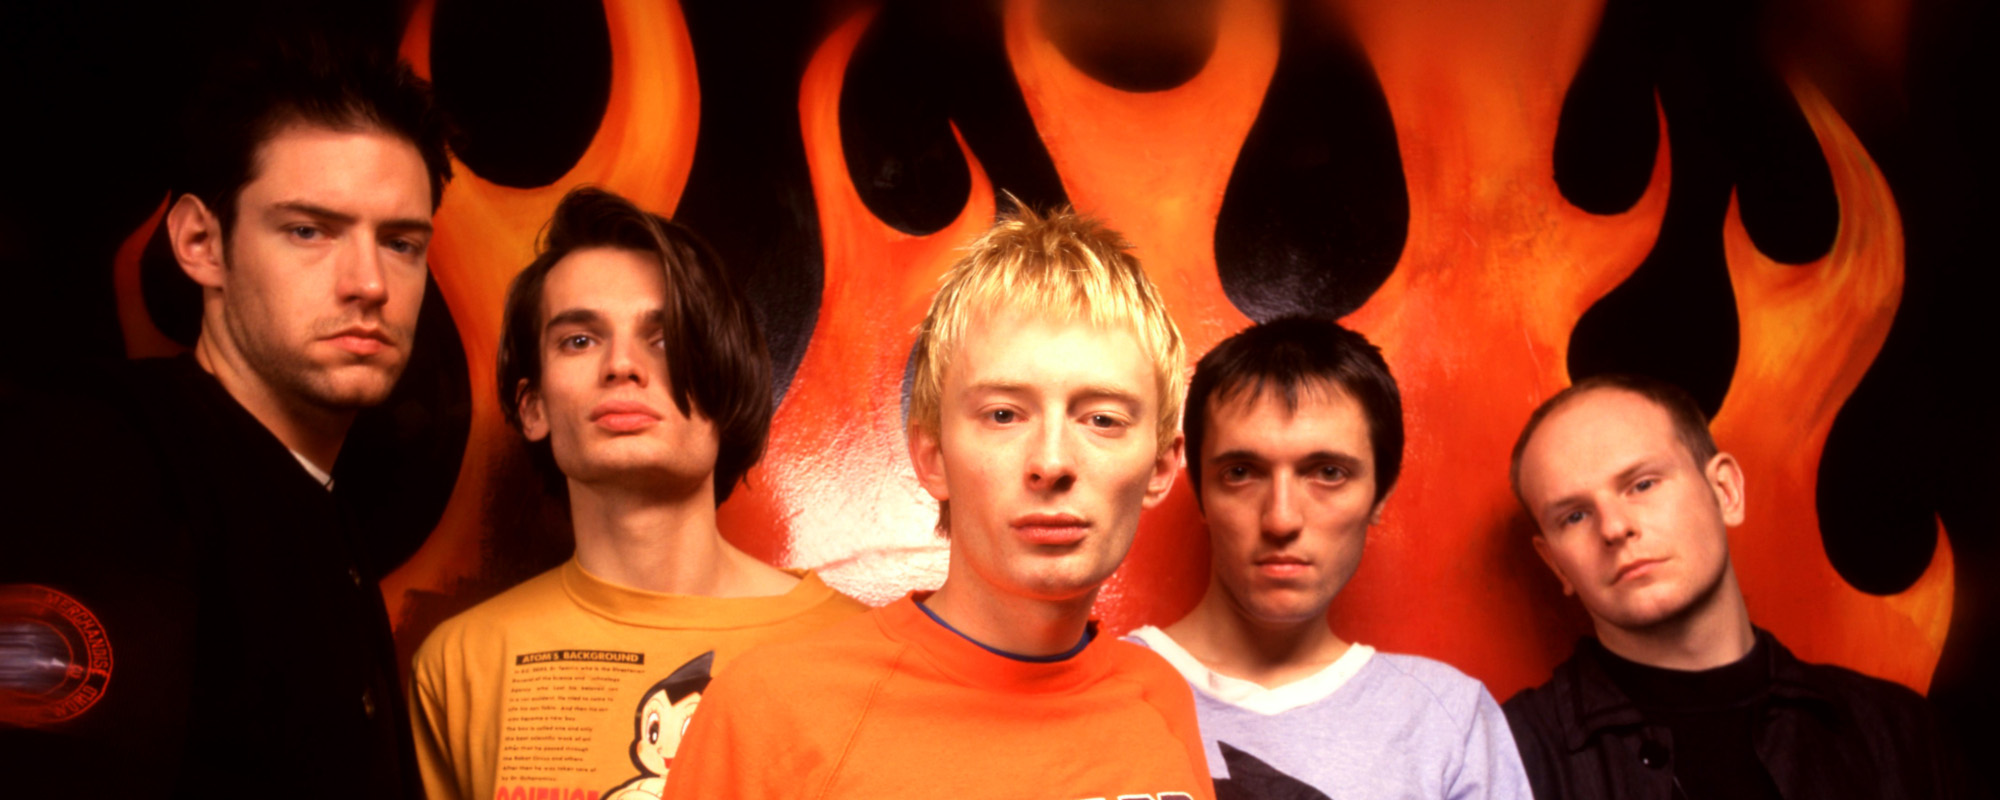 The Meaning Behind Radiohead’s Hit “Creep”